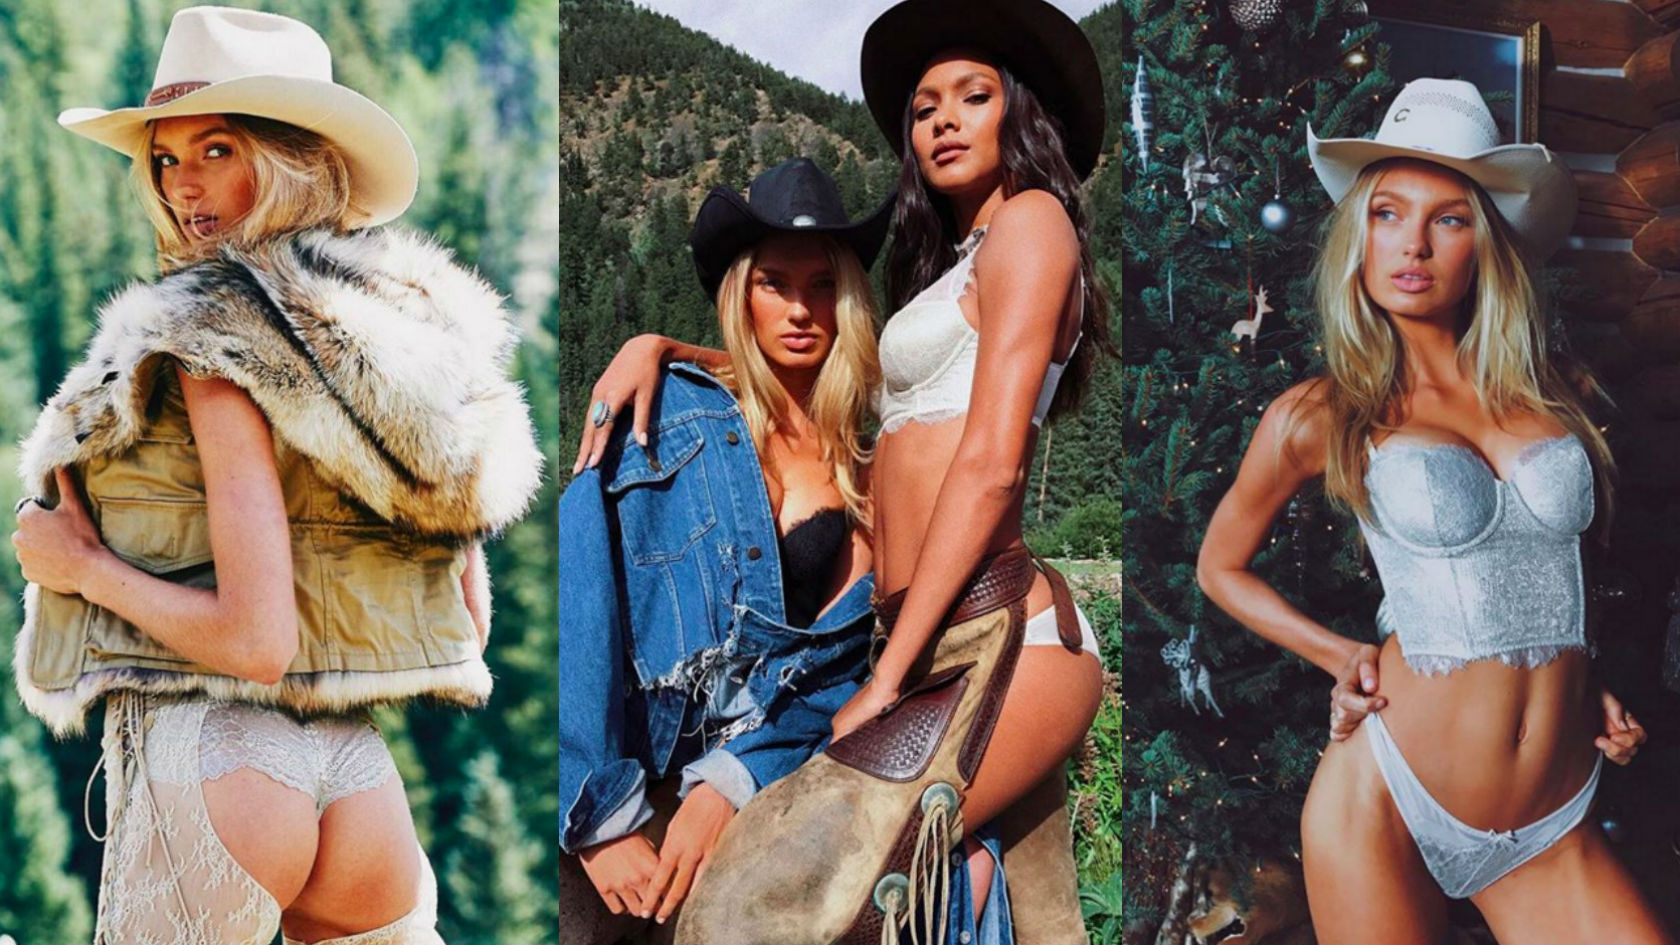 Victoria's Secret Angels Become Cowgirls In Colorado For Holiday Shoot